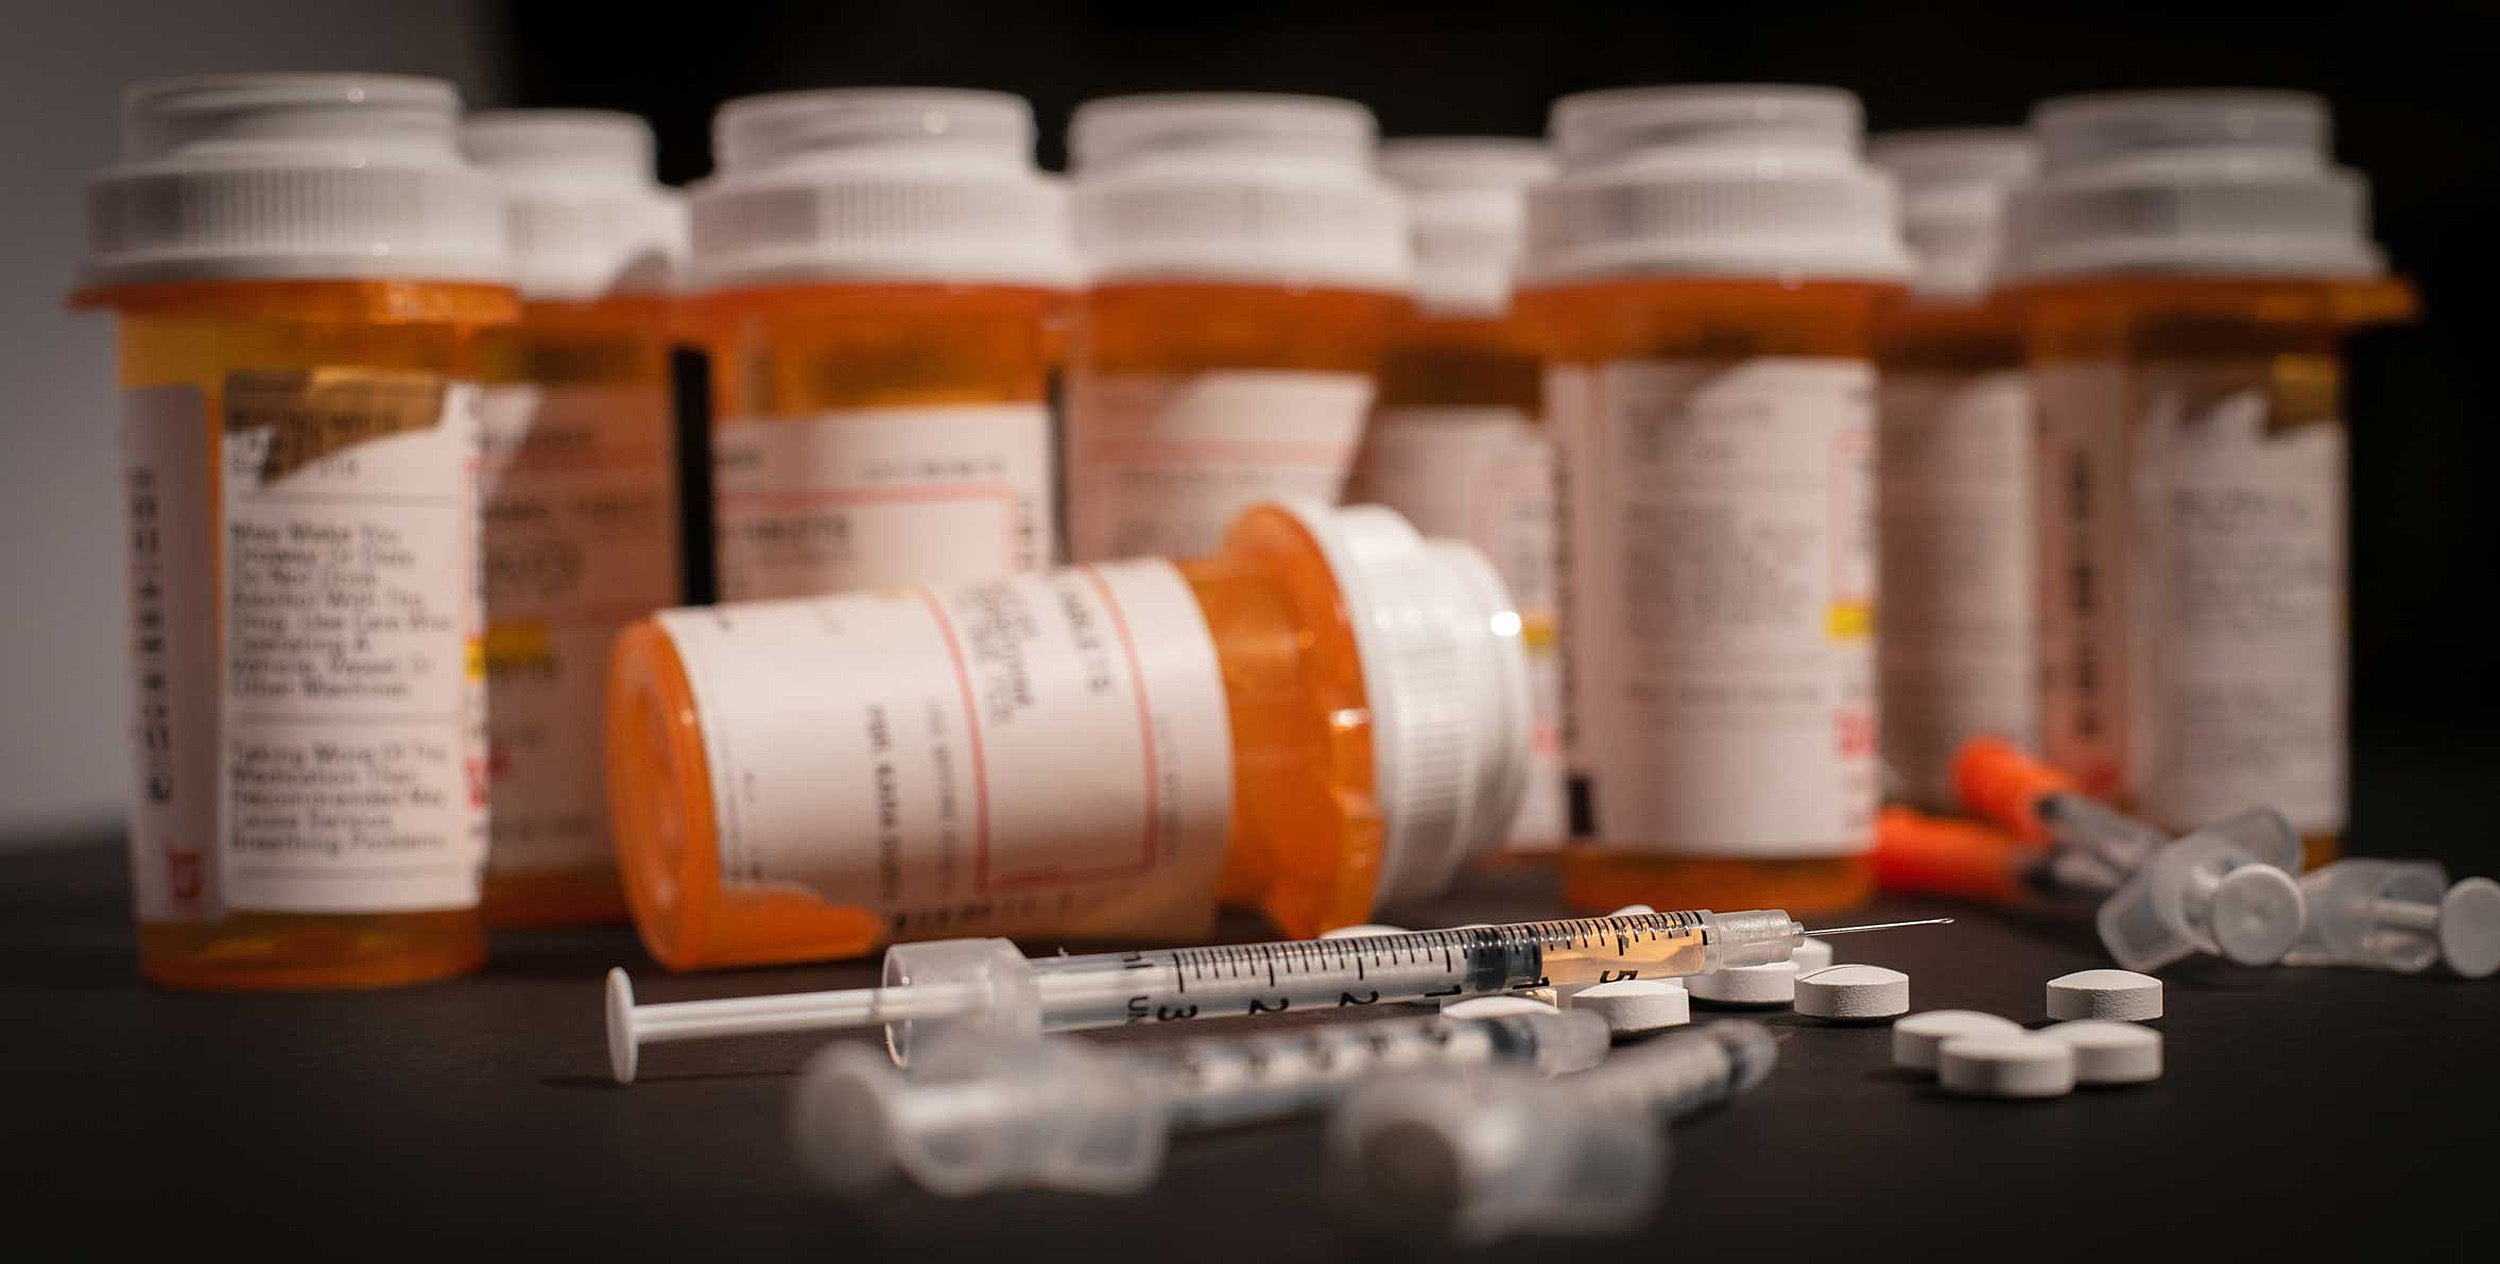 opioid bottles and a syringe